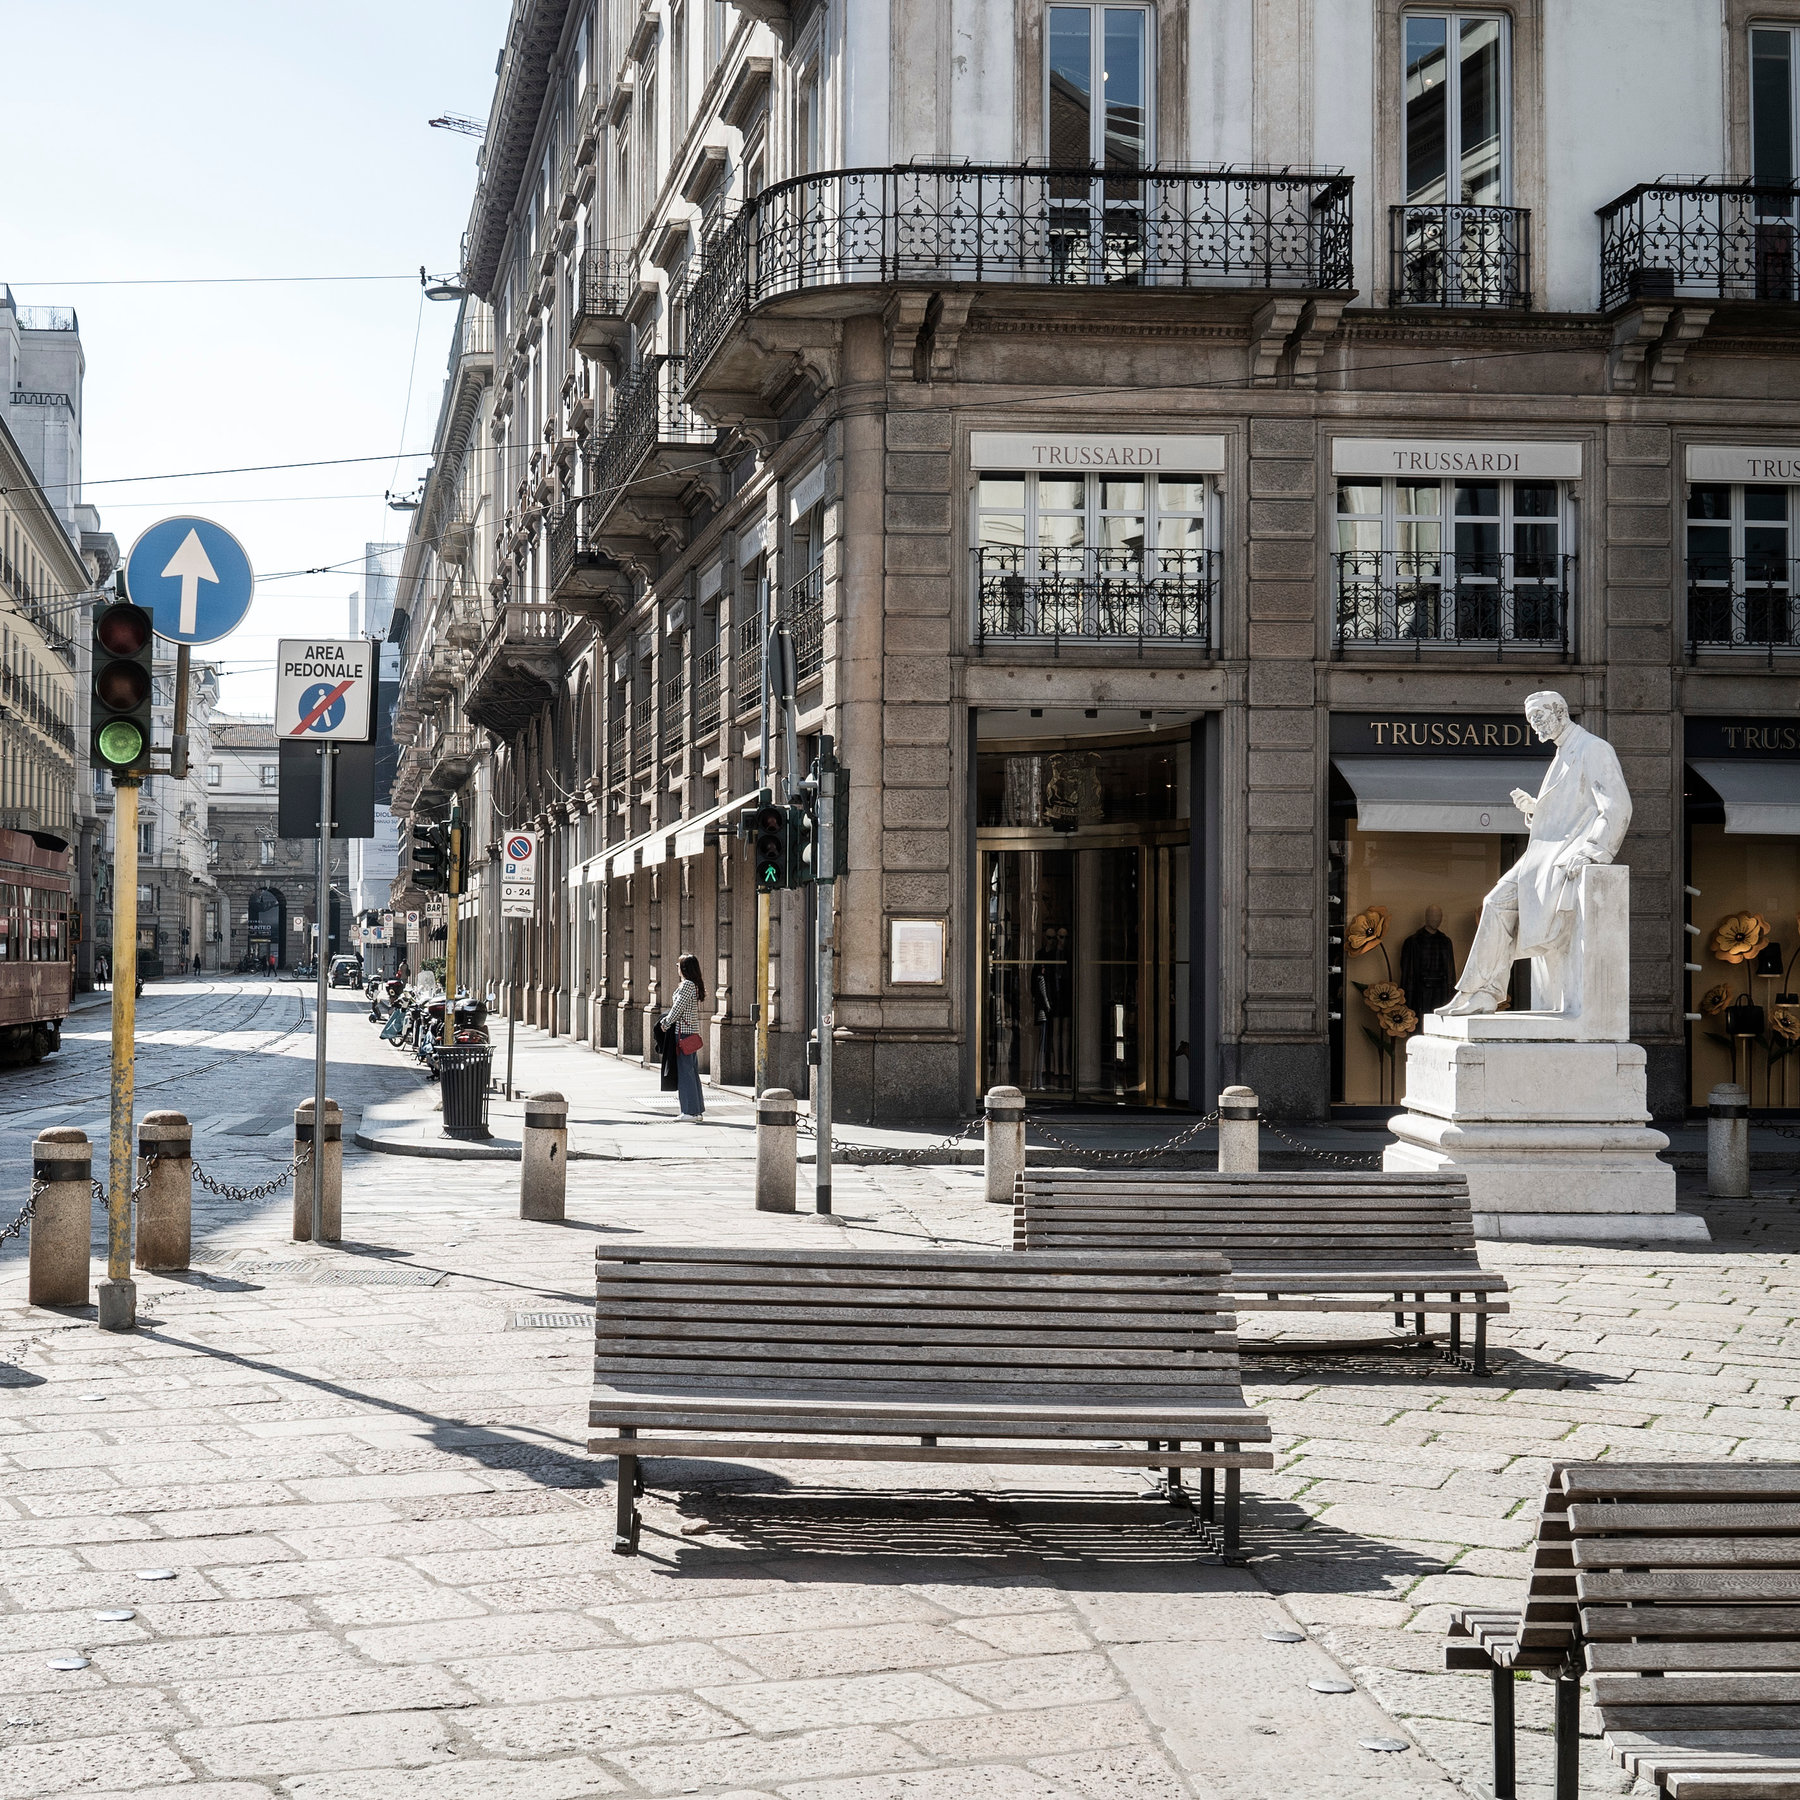 Corner street with benches in Italy